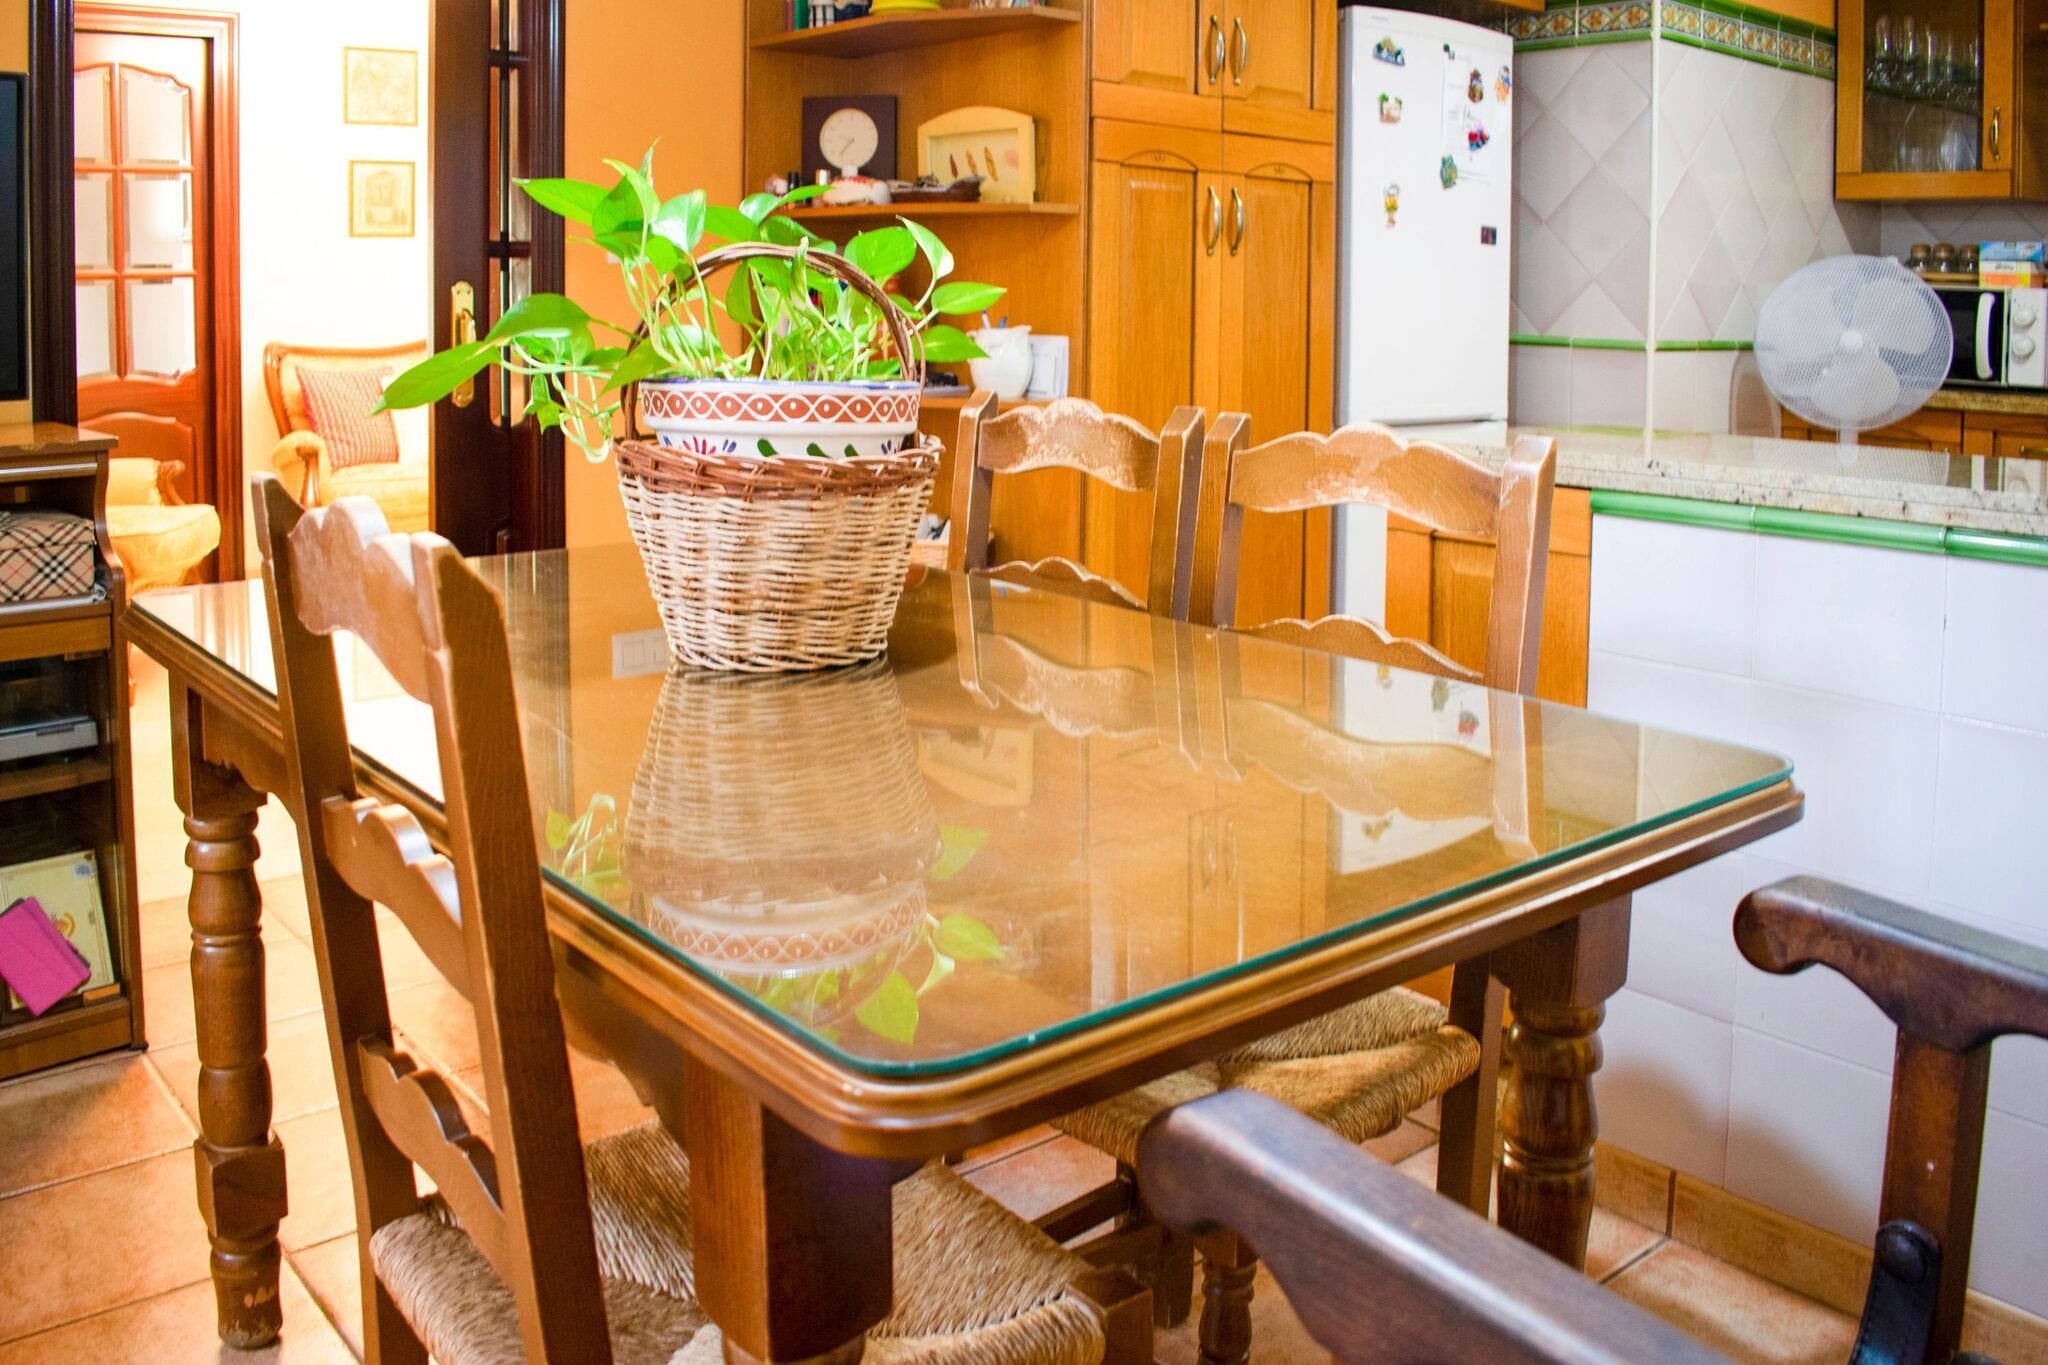 Lovely Holiday Home in Seville with Private Terrace